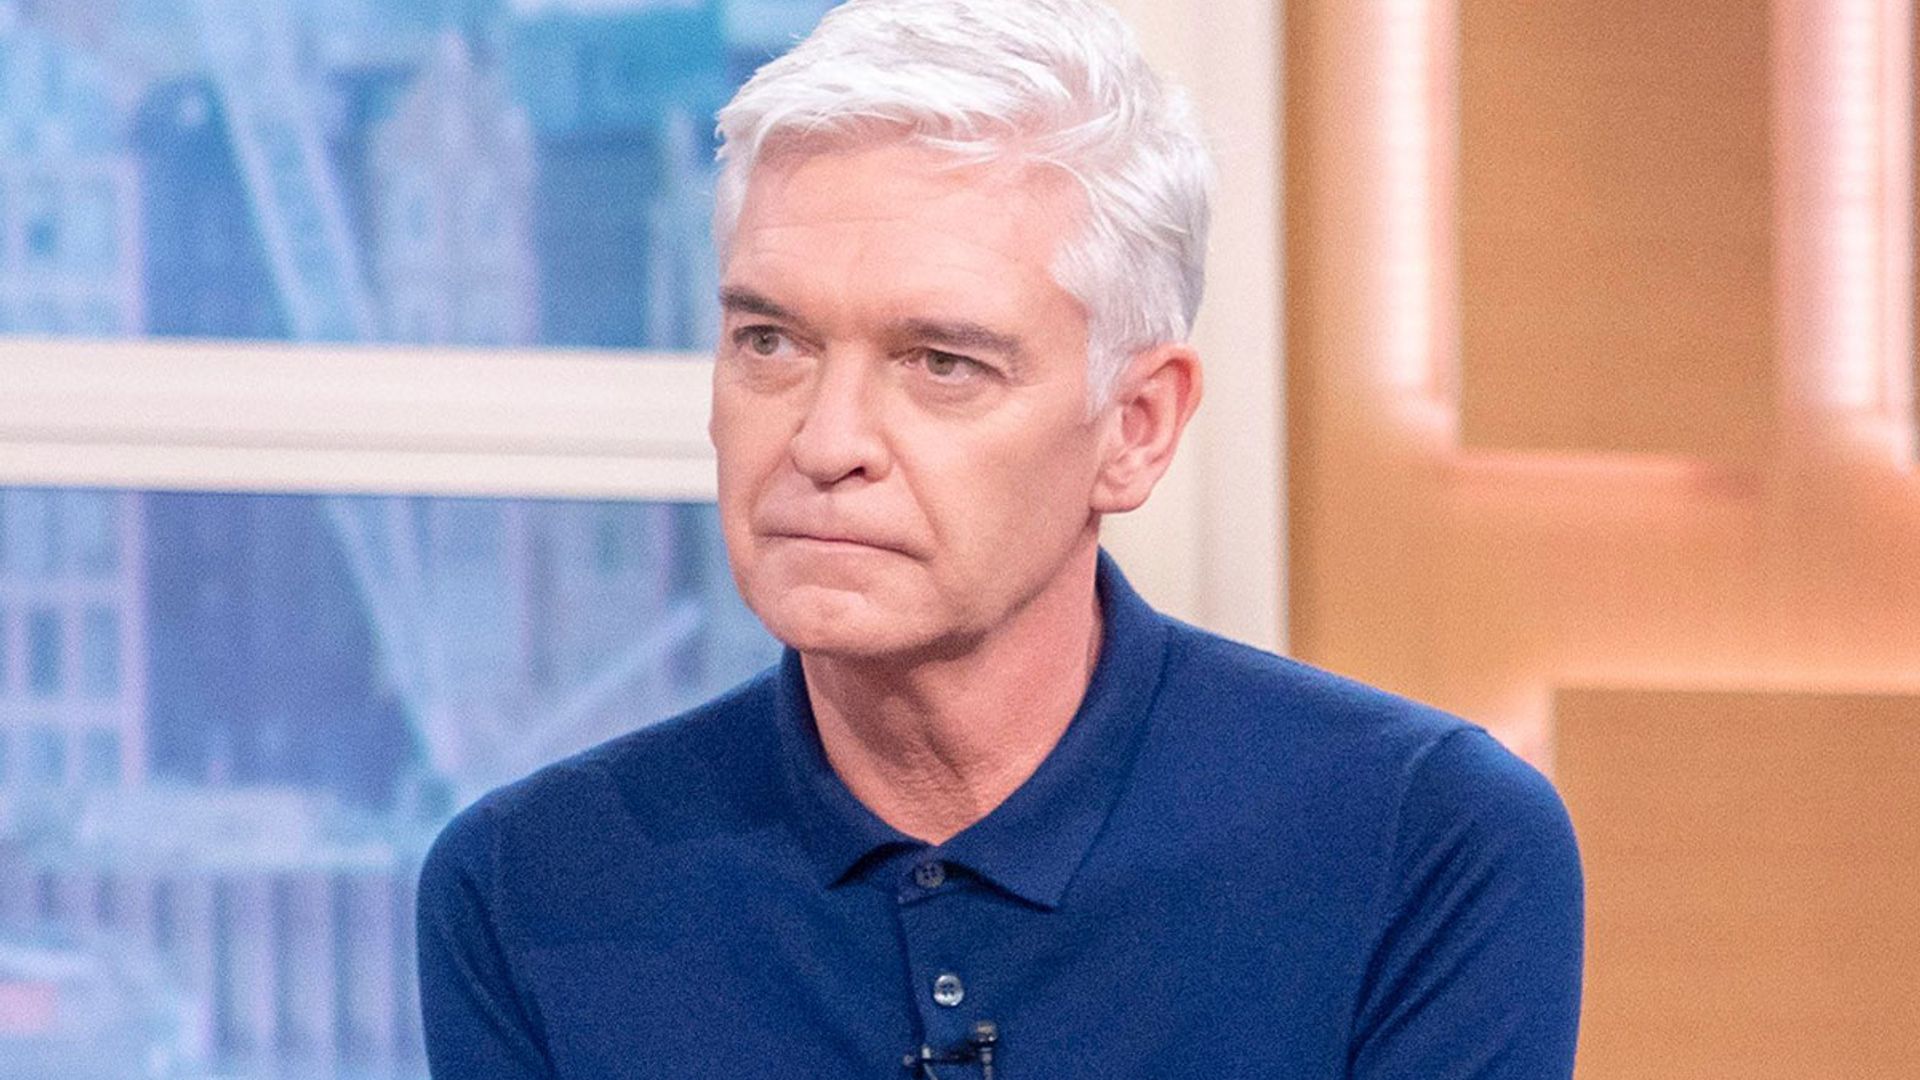 This Morning's Phillip Schofield changes perspective over 'personal struggles' after coming out as gay